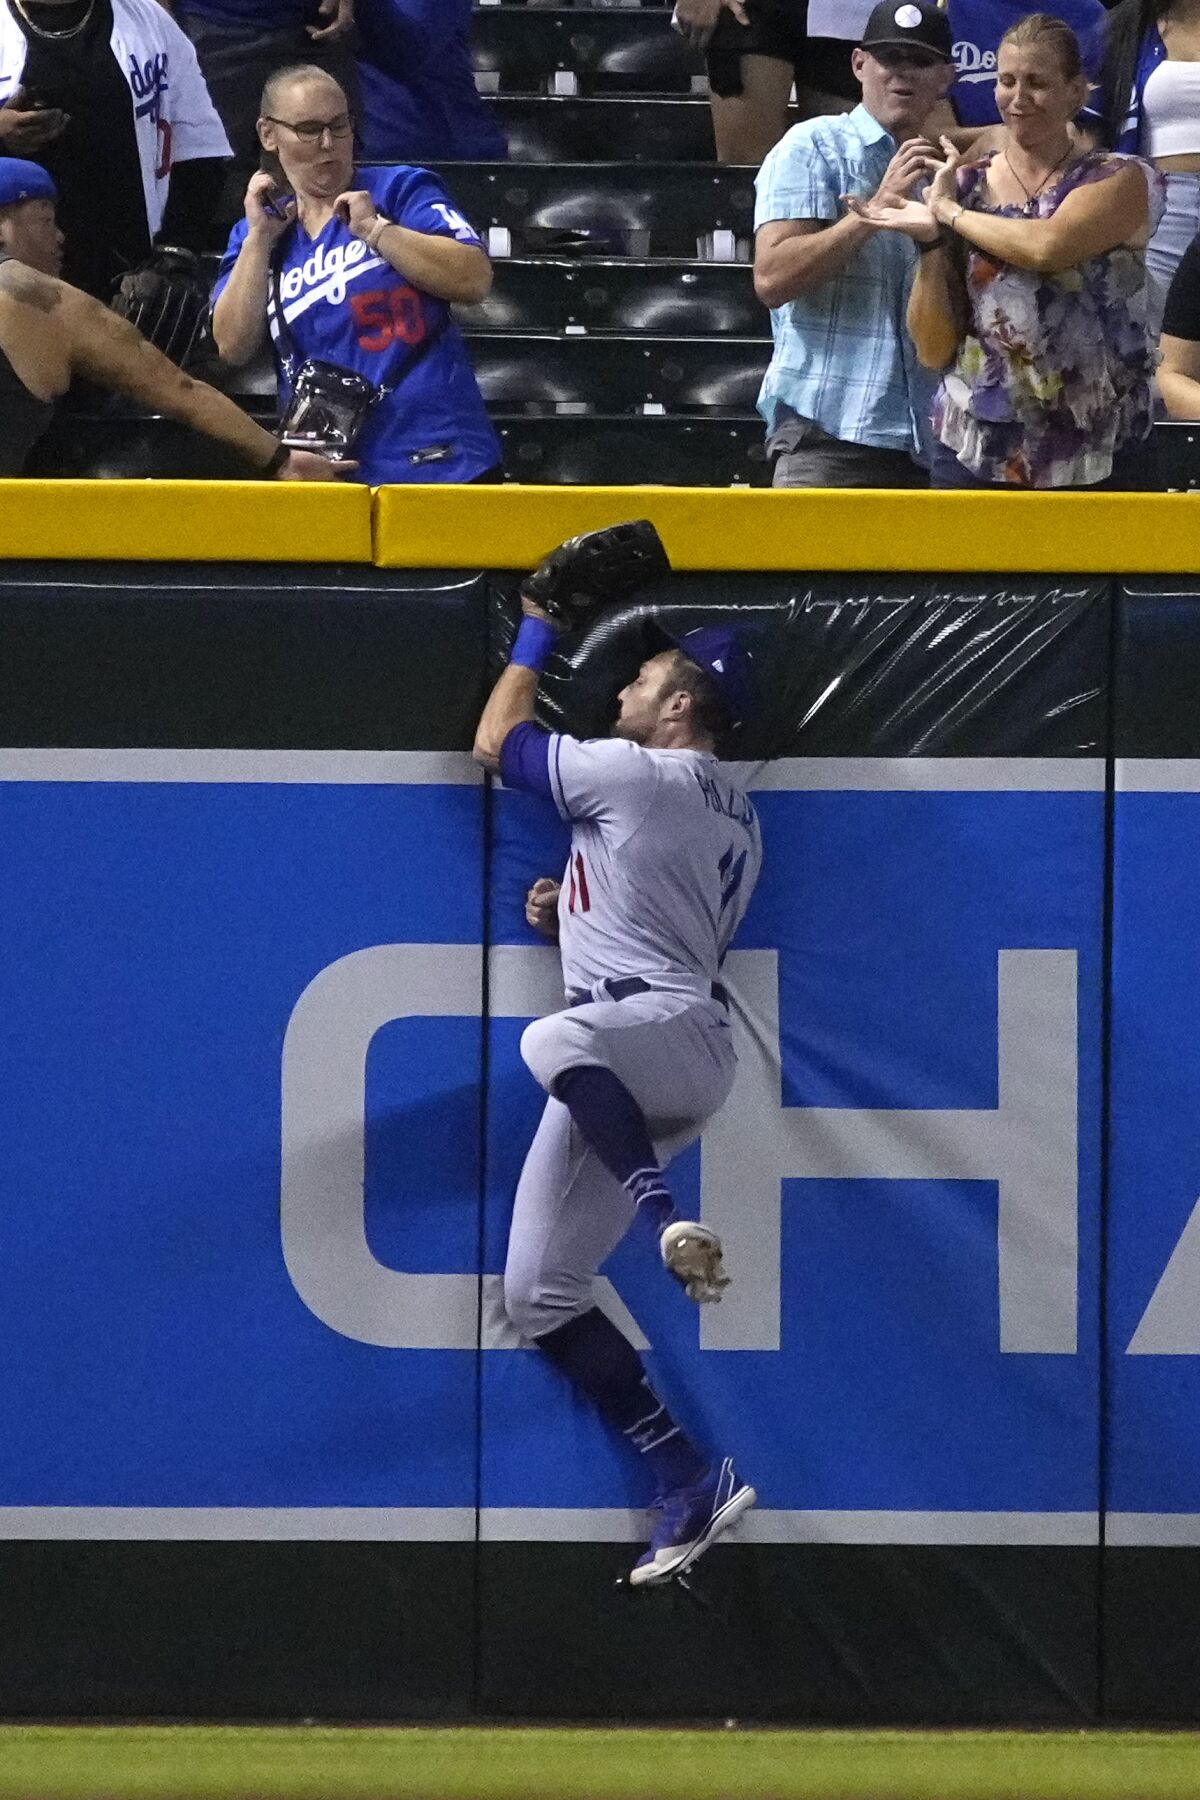 Dodgers left fielder AJ Pollock collides into the left-field wall as he catches a fly ball.